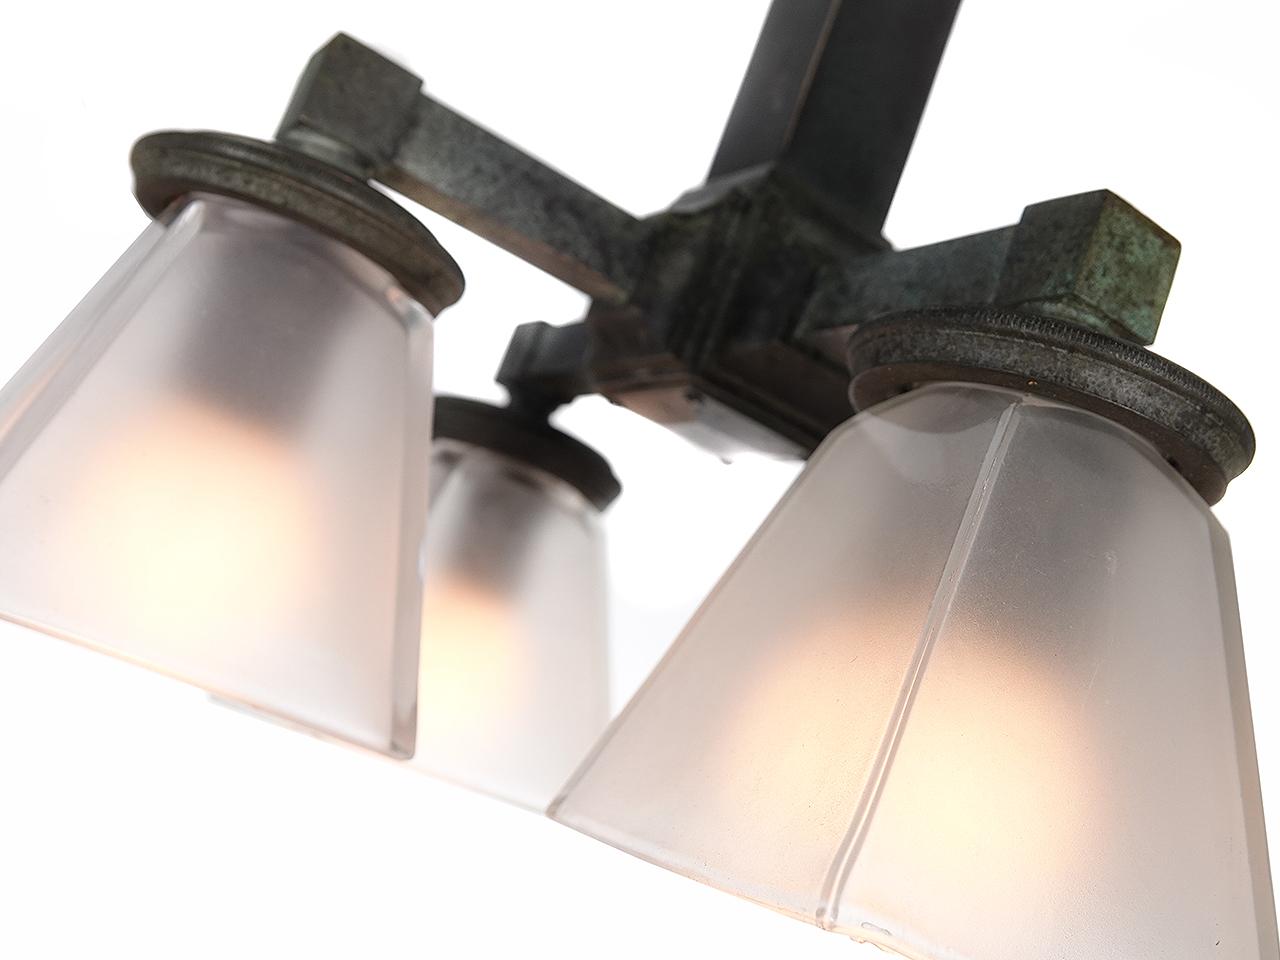 This is an authentic early 20th century cast bronze 4 light subway station ceiling lamp. Several variations of this fixture were used in New York's subway stations. This example still has the original dark finish with hints of green. We rewired all